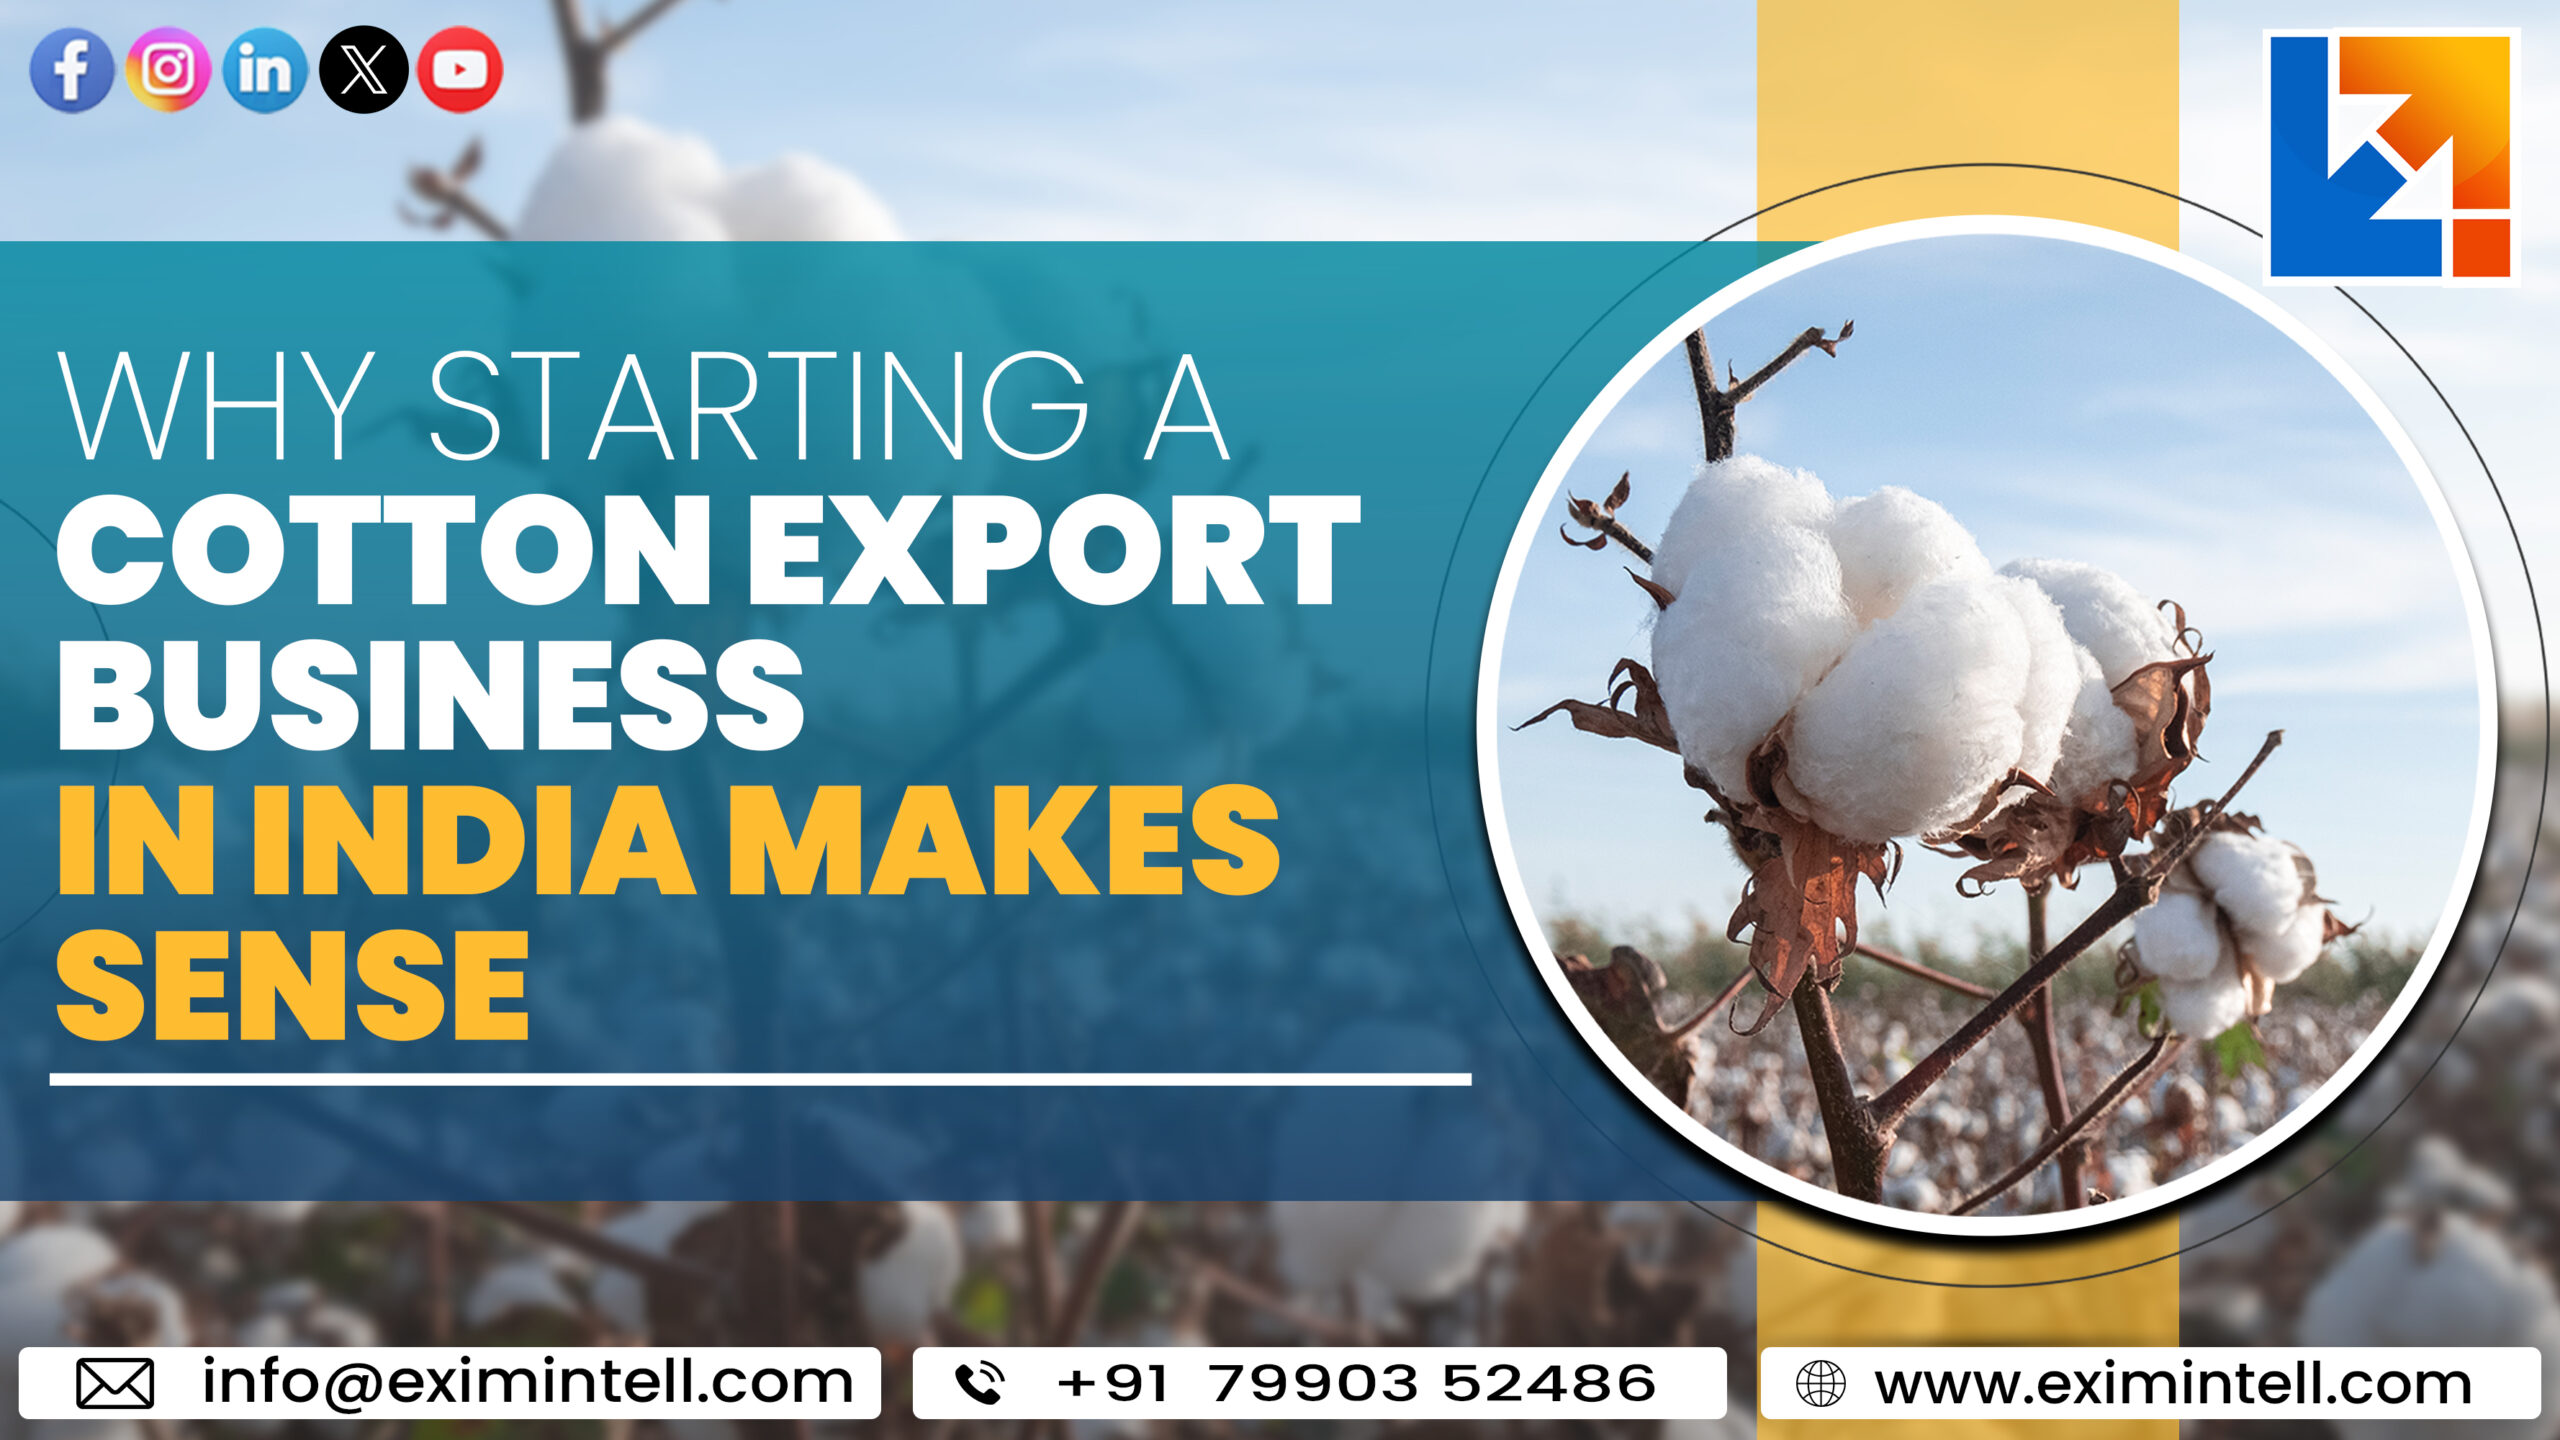 Why Starting a Cotton Export Business in India Makes Sense